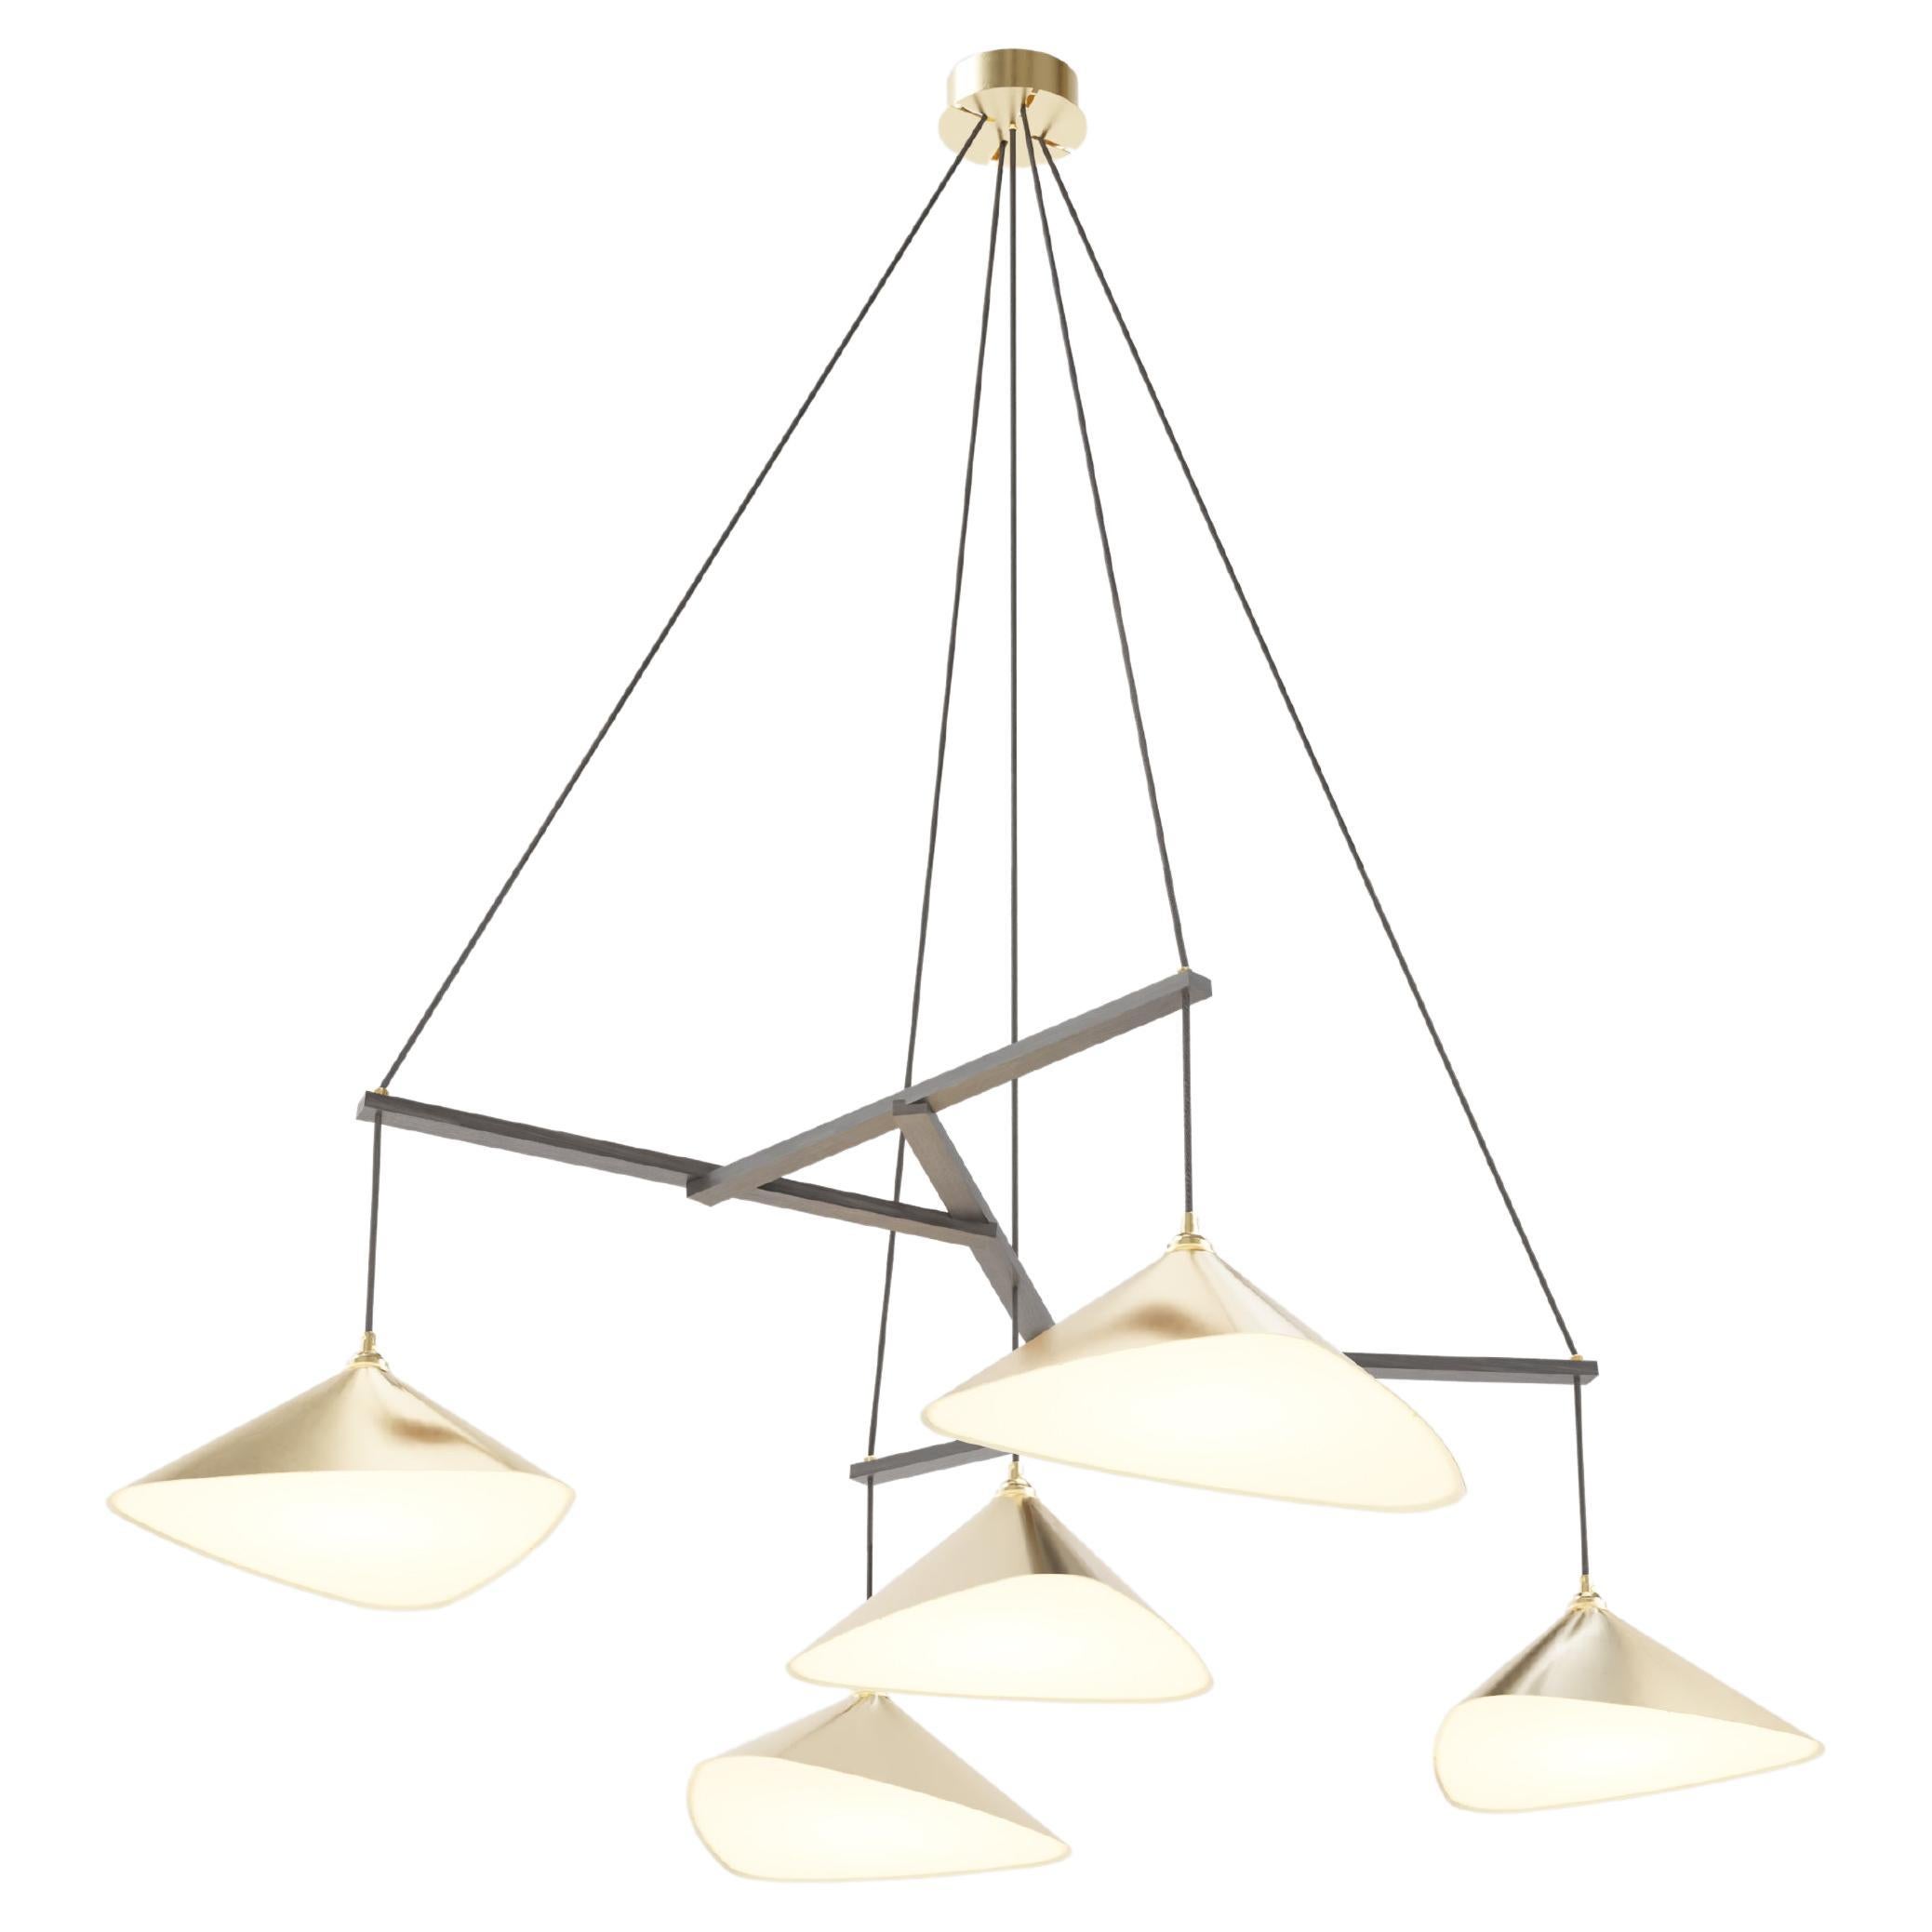 Large Daniel Becker 'Emily 5' Chandelier in Brass and Oak Frame for Moss Objects For Sale 5